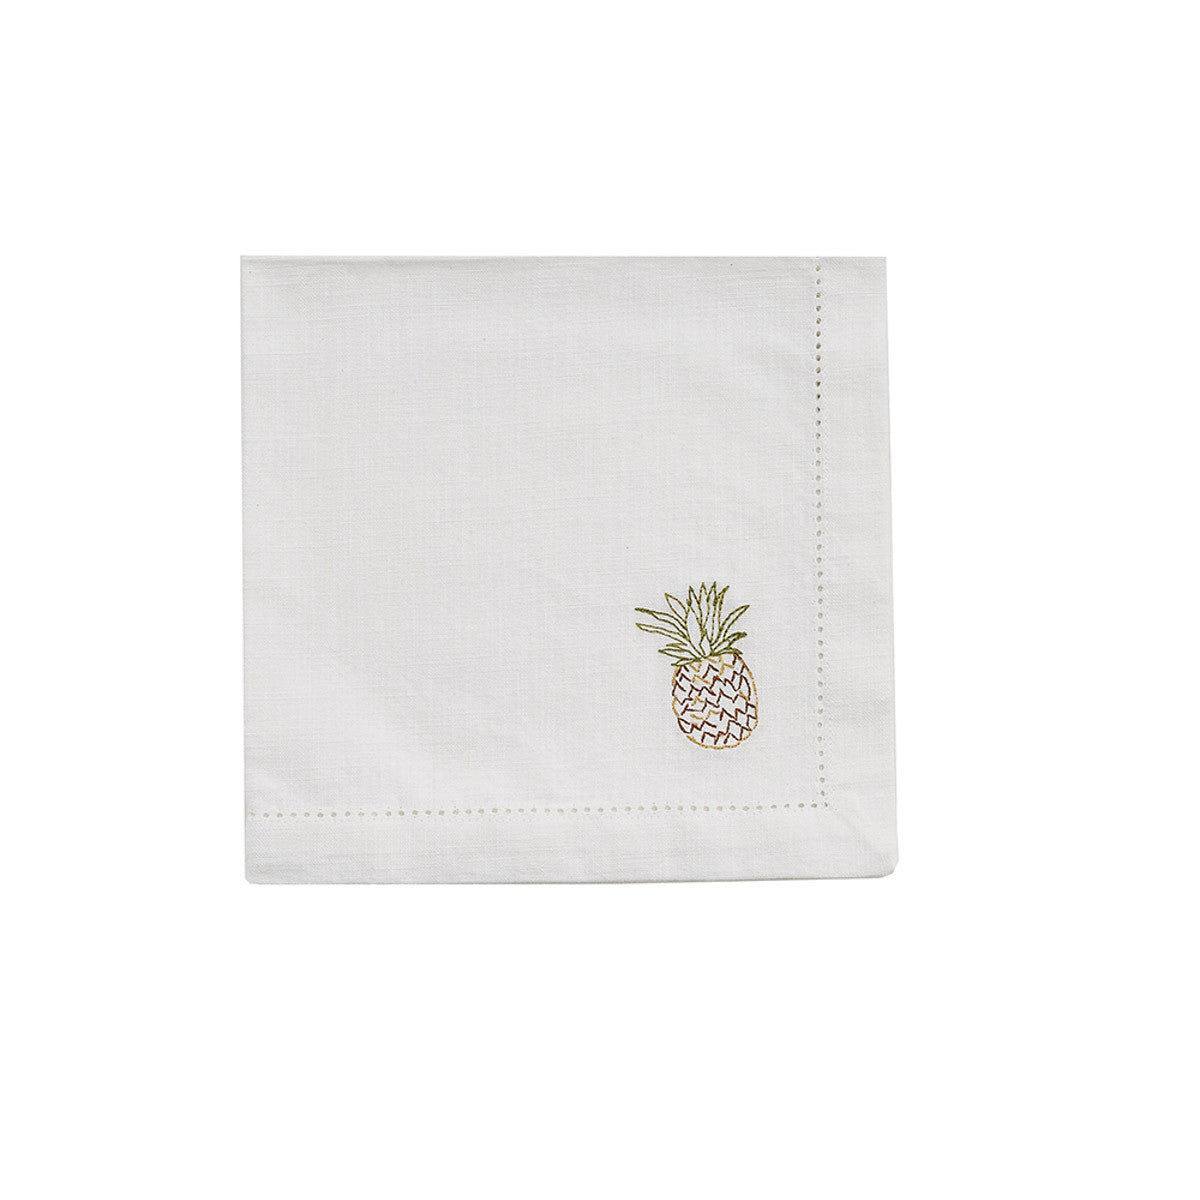 Embroidered Napkin - Pineapple Set of 4  Park Designs